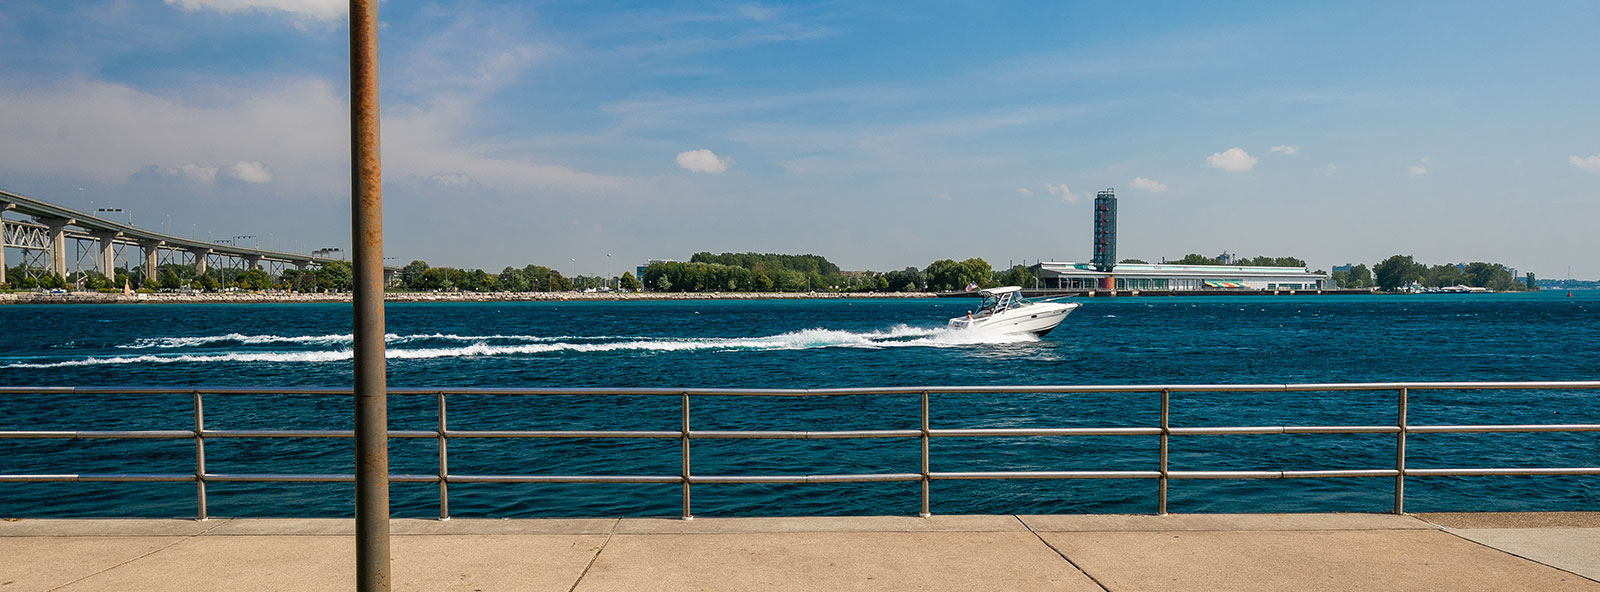 With the St. Clair River as a backdrop, biking trails across the area can be relaxing.